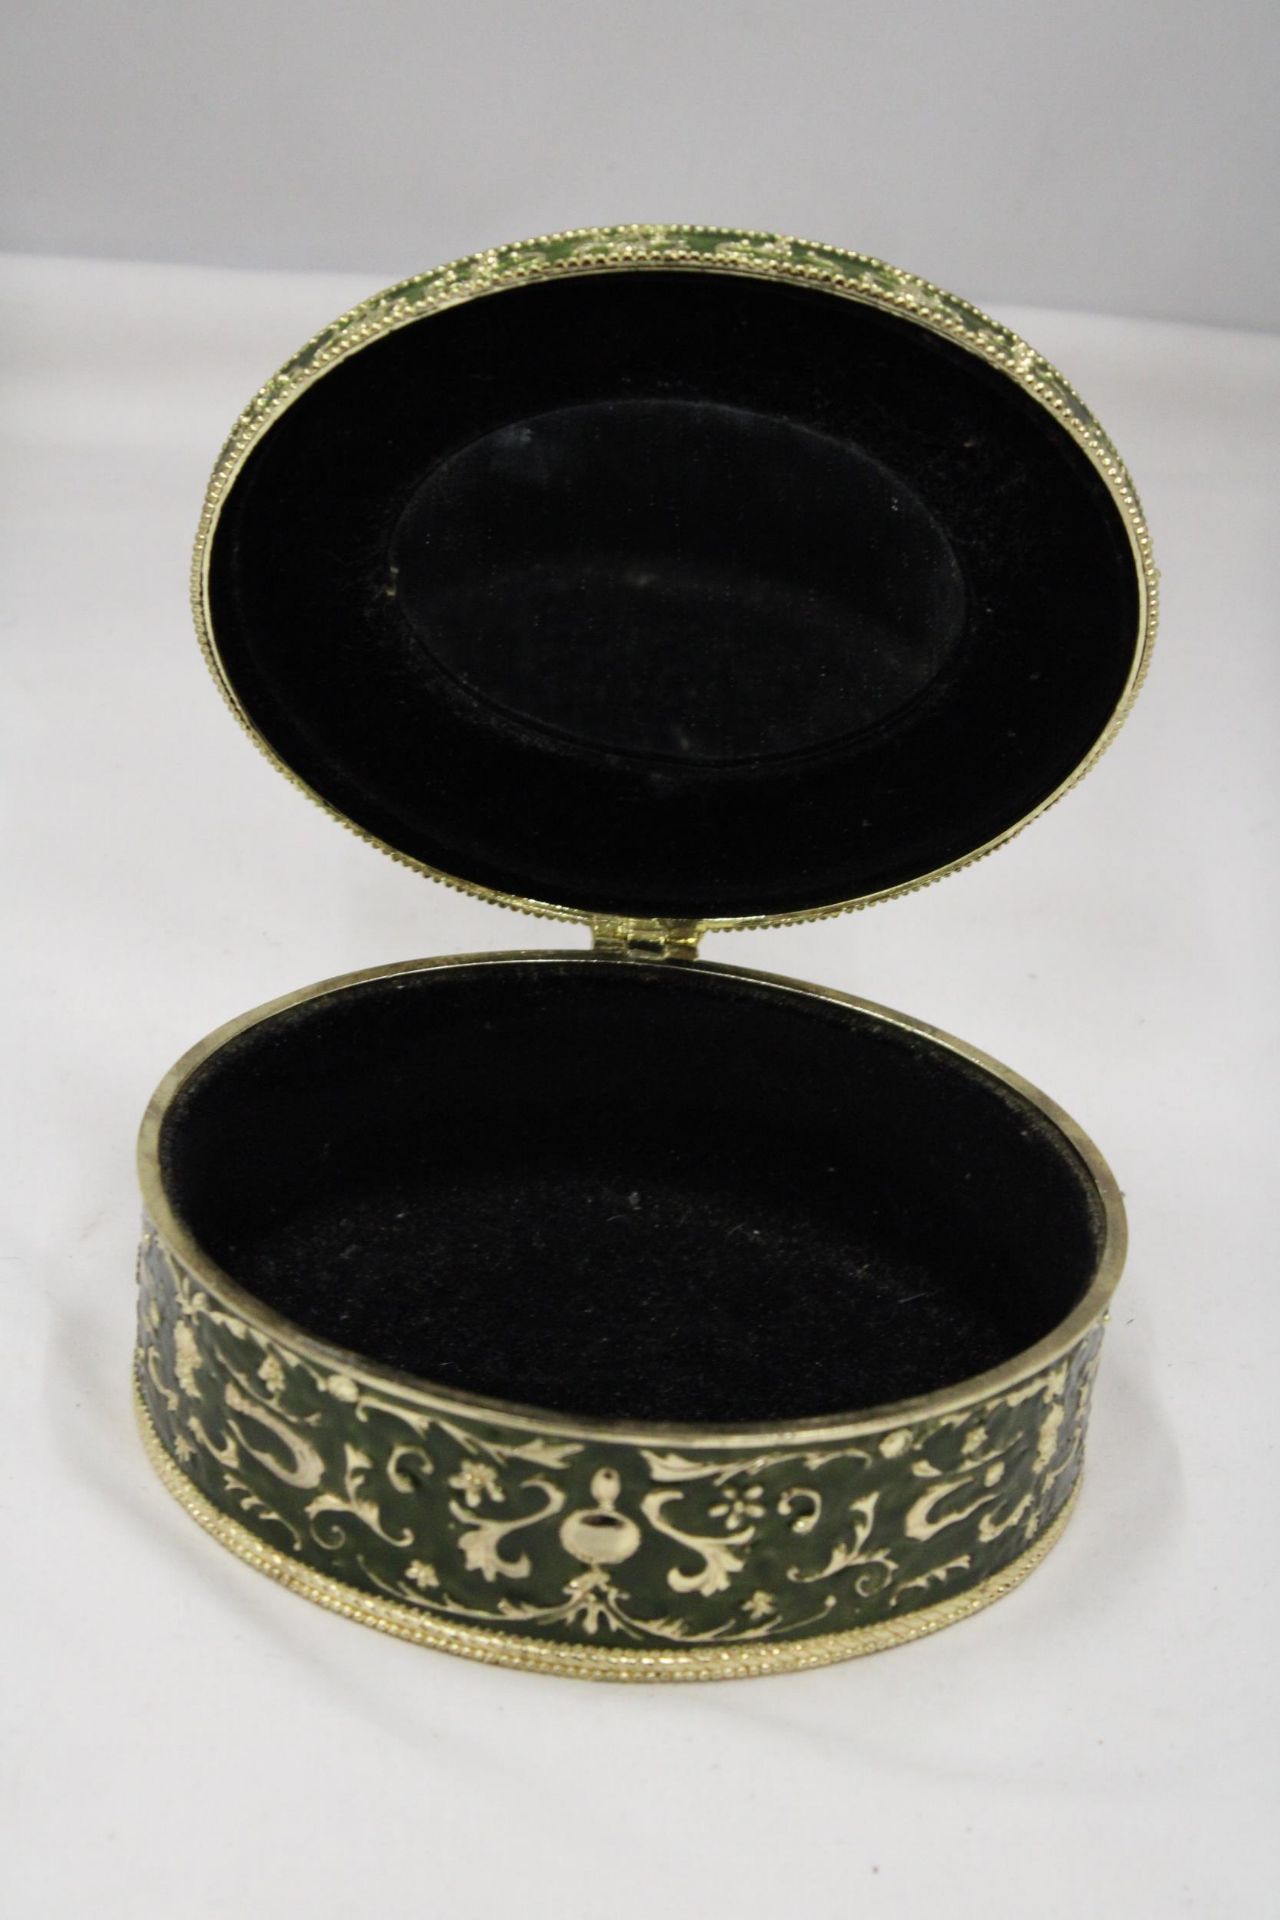 A GREEN ENAMELLED KEEPSAKE/JEWELLERY BOX WITH A JEWELLED FRONG ON THE LID, HEIGHT 8CM, DIAMETER, - Image 5 of 5